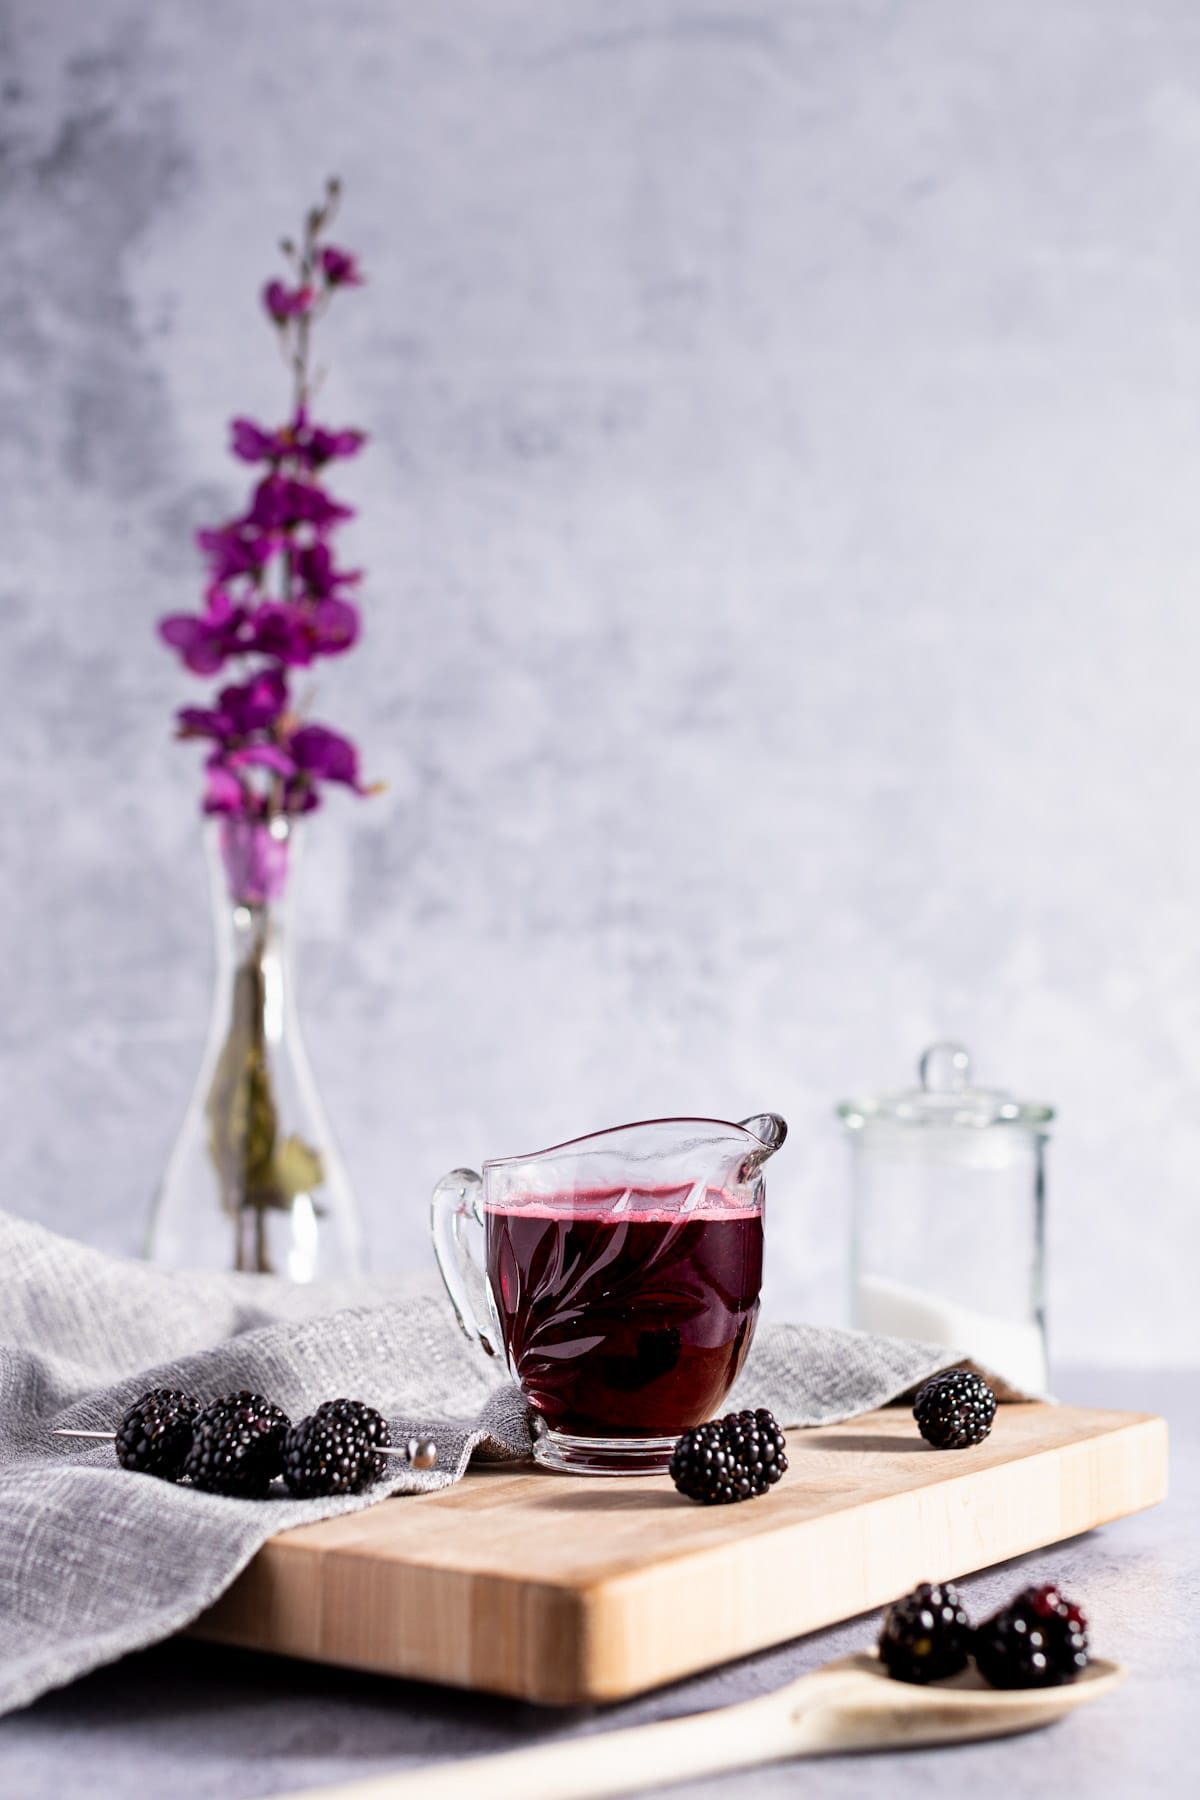 Glass container of simple syrup, sitting on a wooden board, next to fresh blackberries, with a glass vase filled with purple flowers in the background.